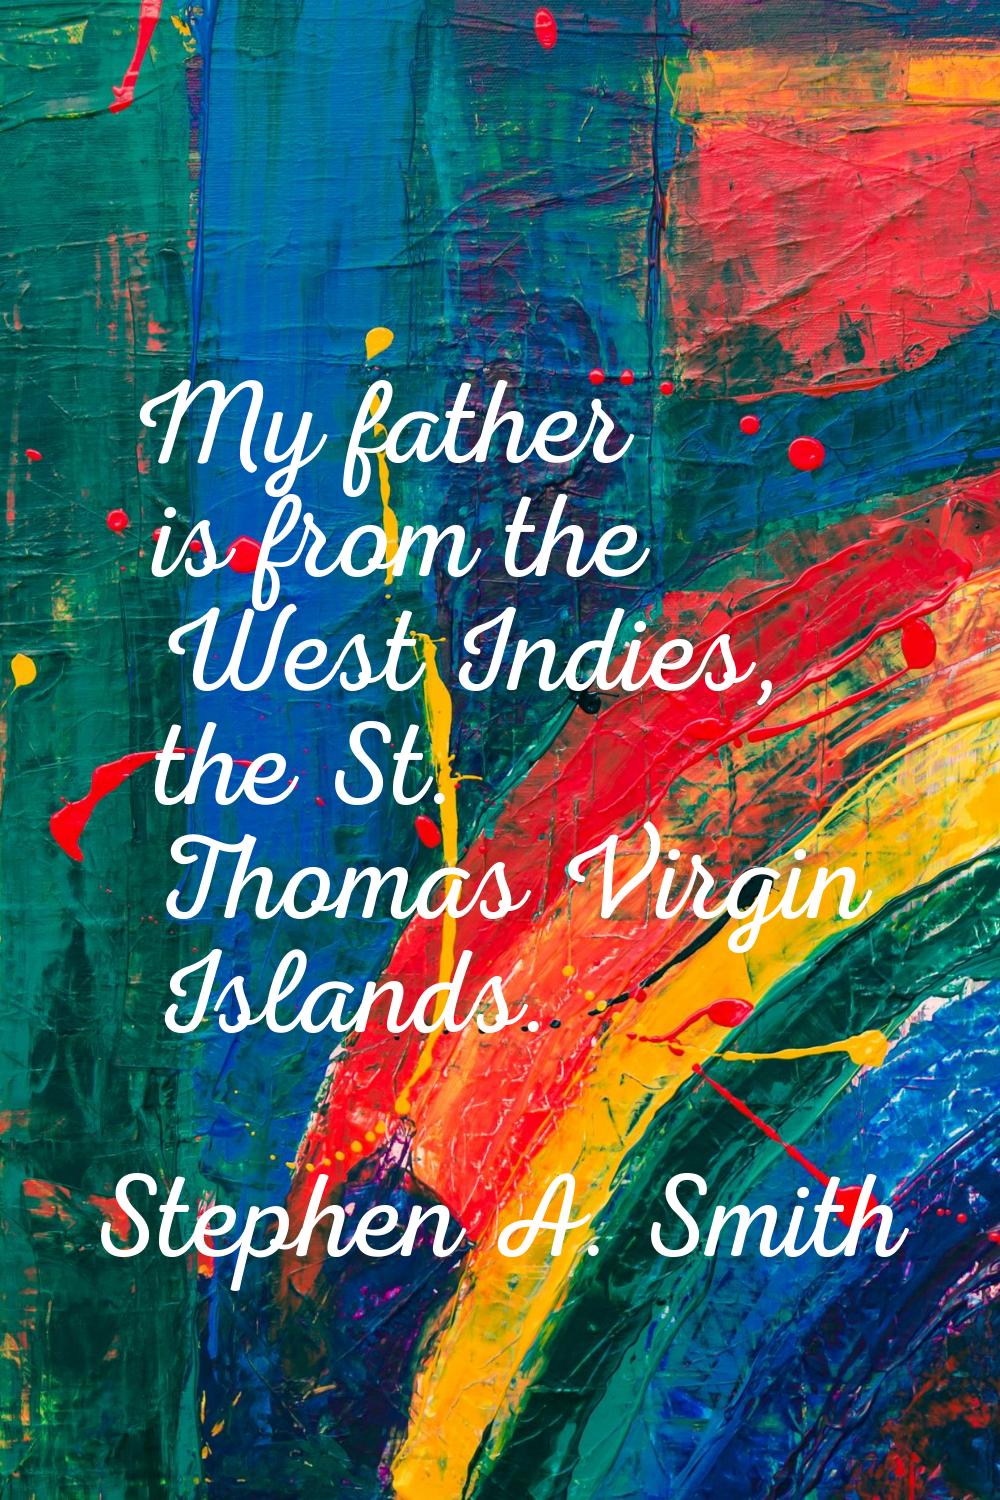 My father is from the West Indies, the St. Thomas Virgin Islands.